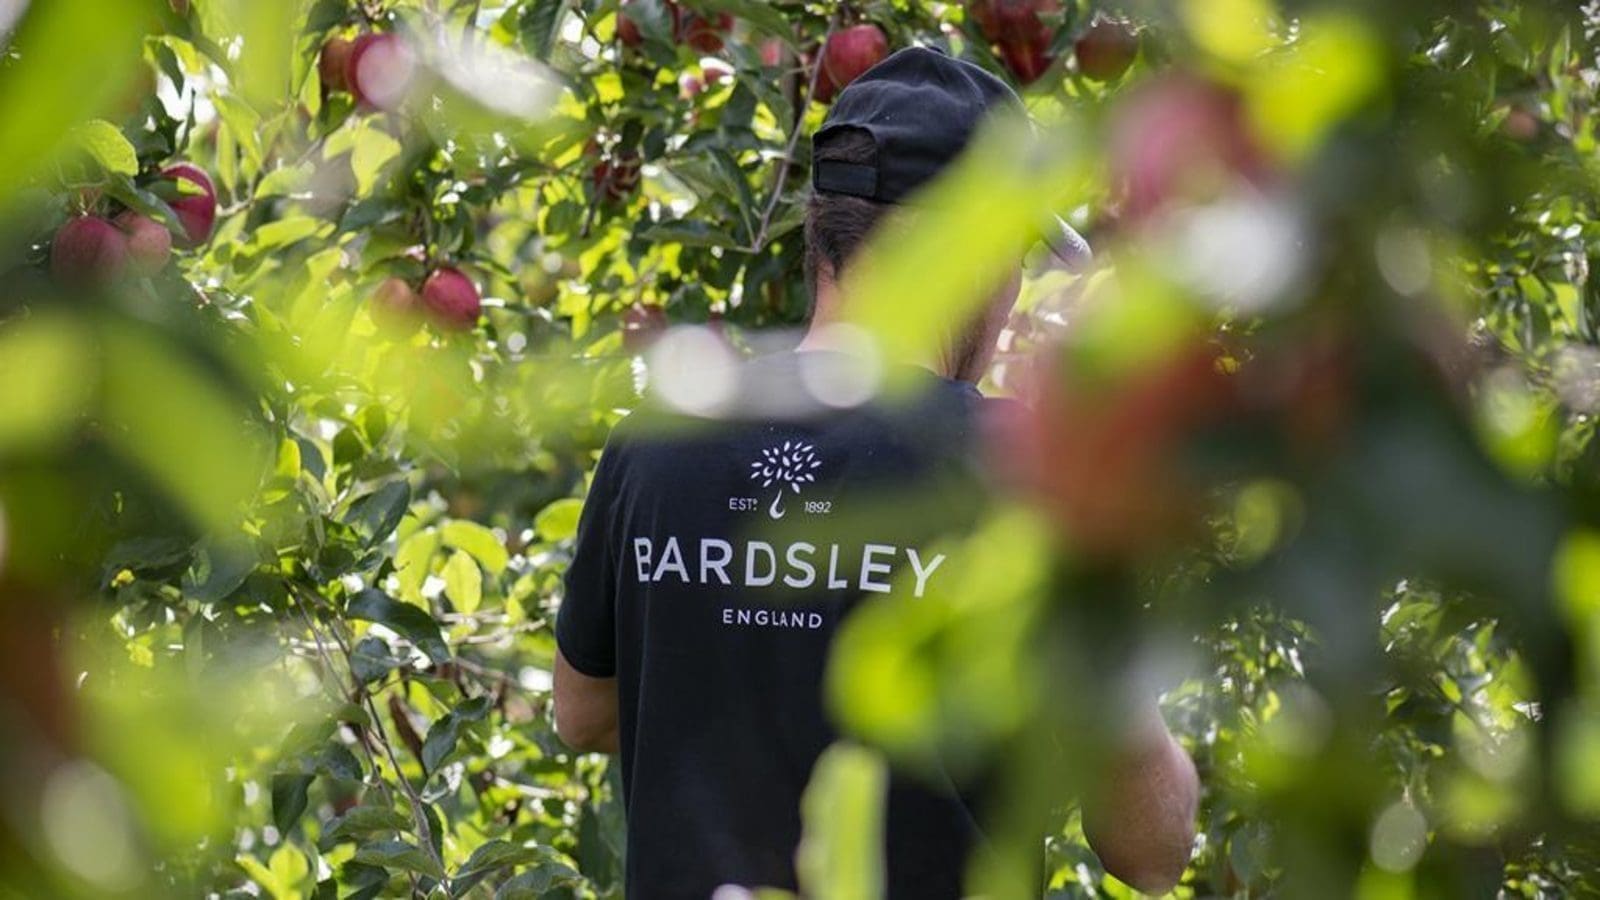 Camelia diversifies product, geographic portfolio with acquisition of UK’s second largest Apple grower Bardsley England